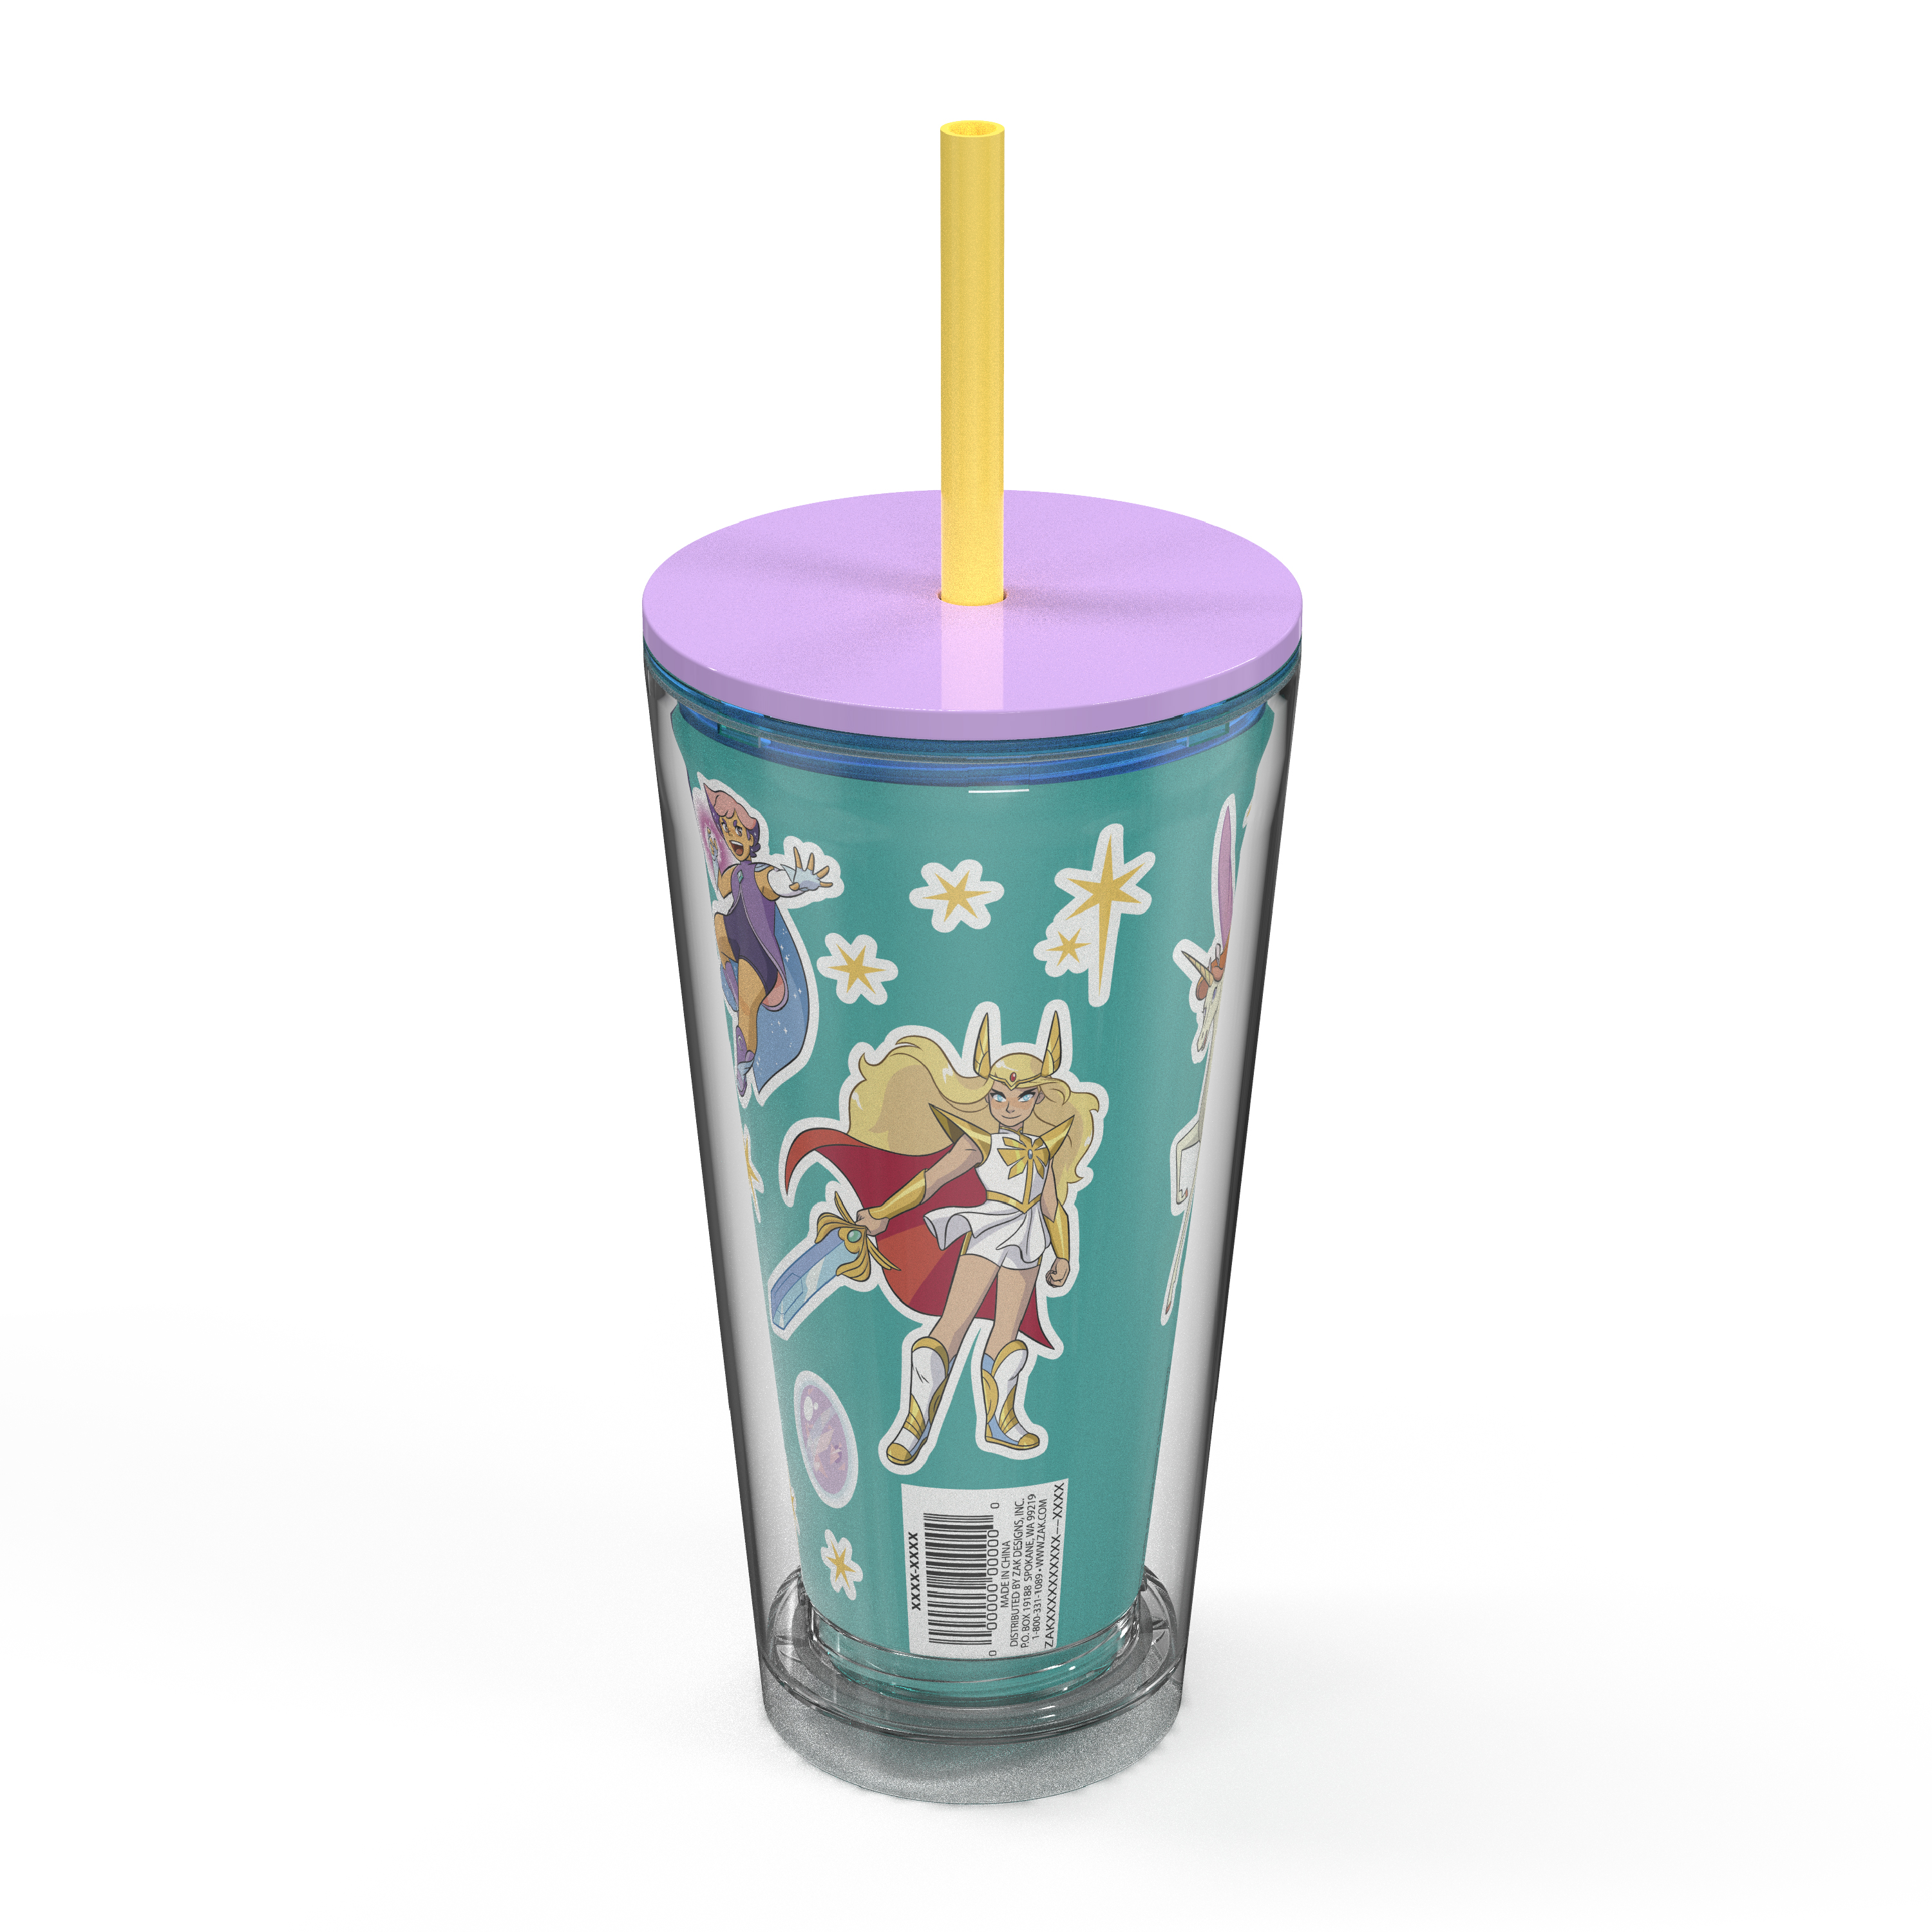 She-Ra 16 ounce Plastic Cup with Lid and Straw, Princess of Power slideshow image 1